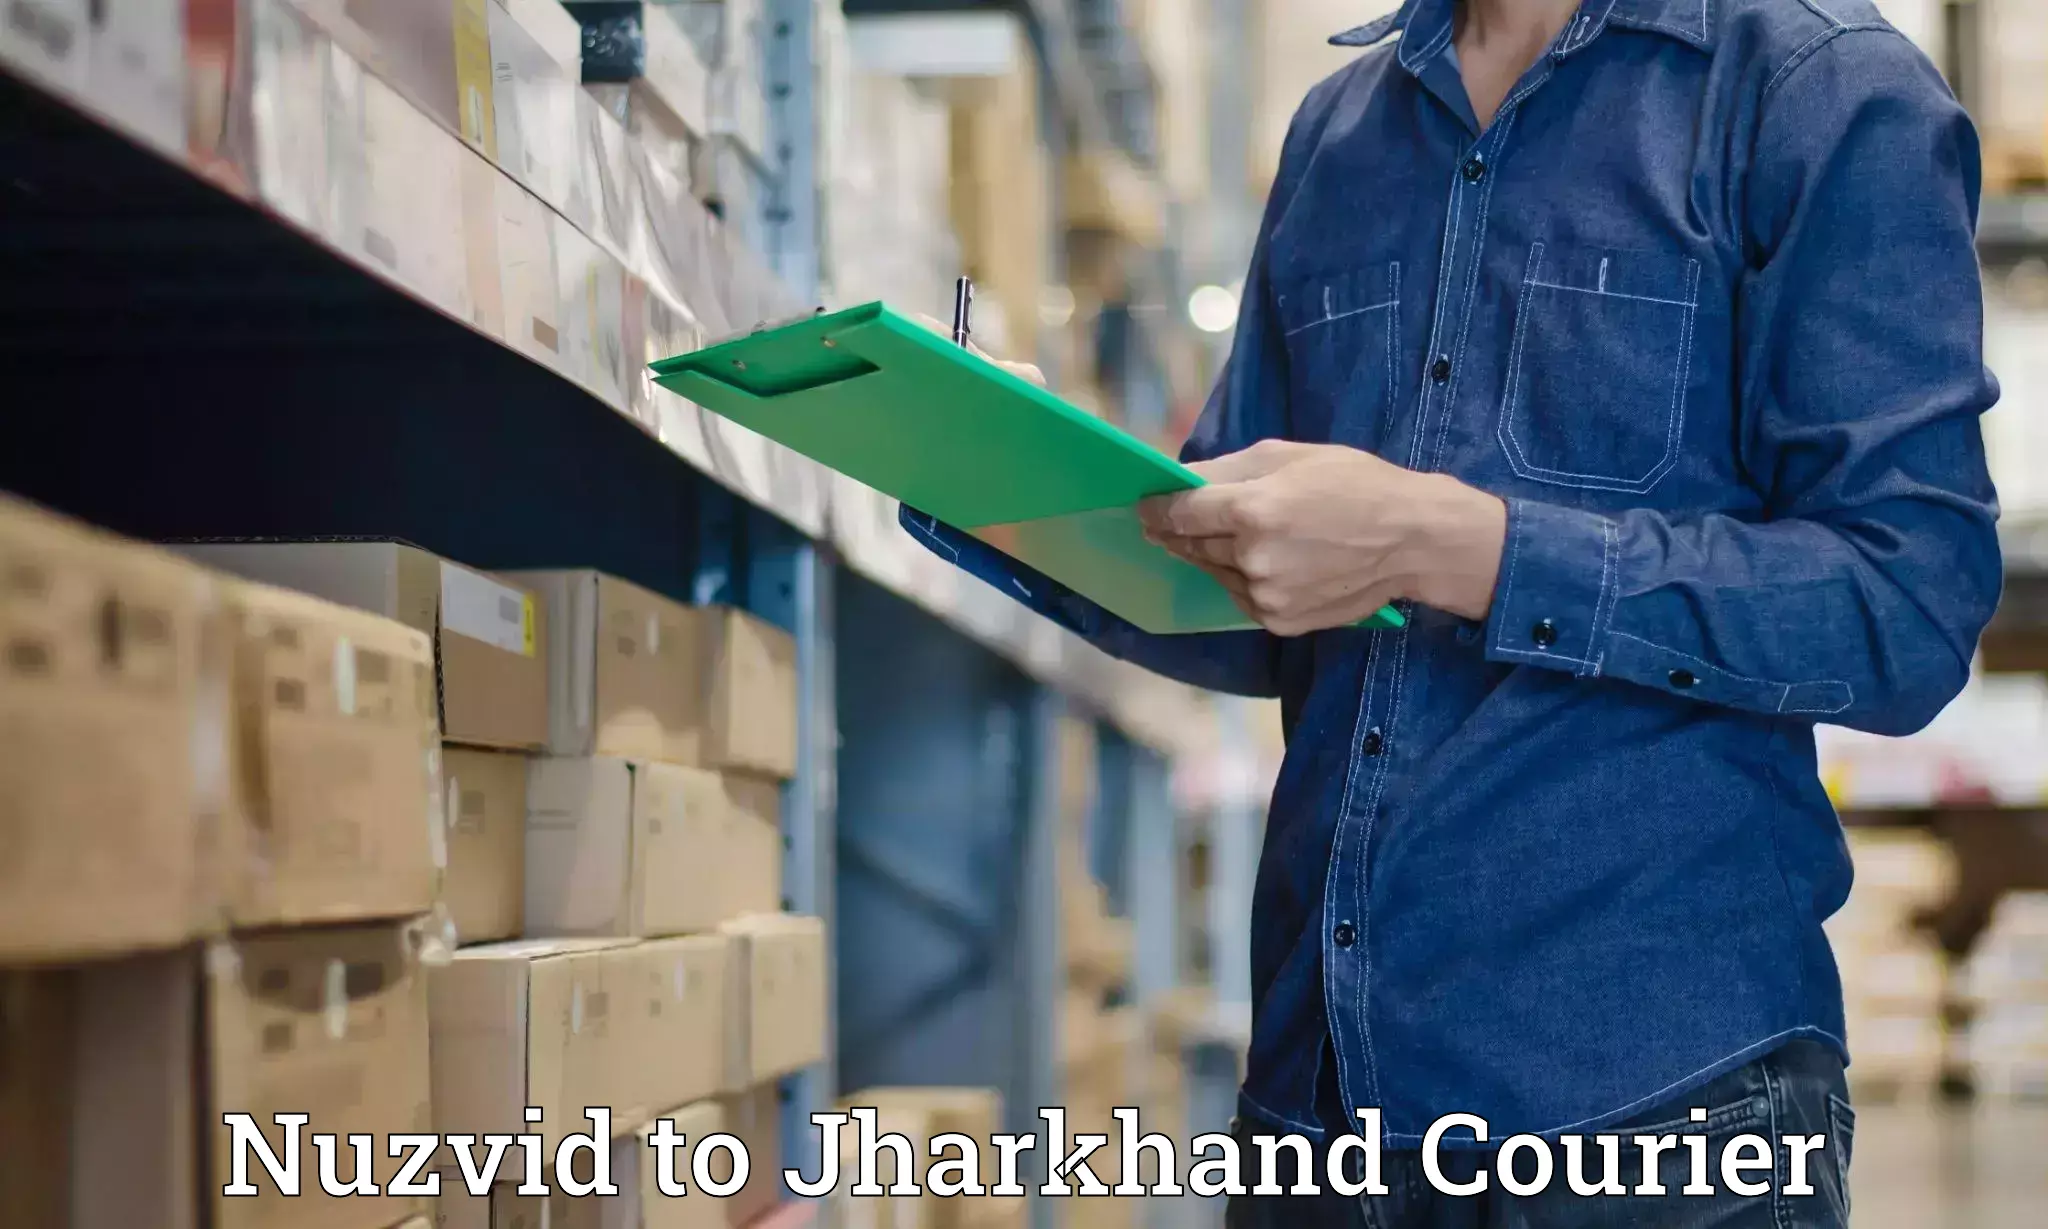 24-hour courier service Nuzvid to Jamshedpur